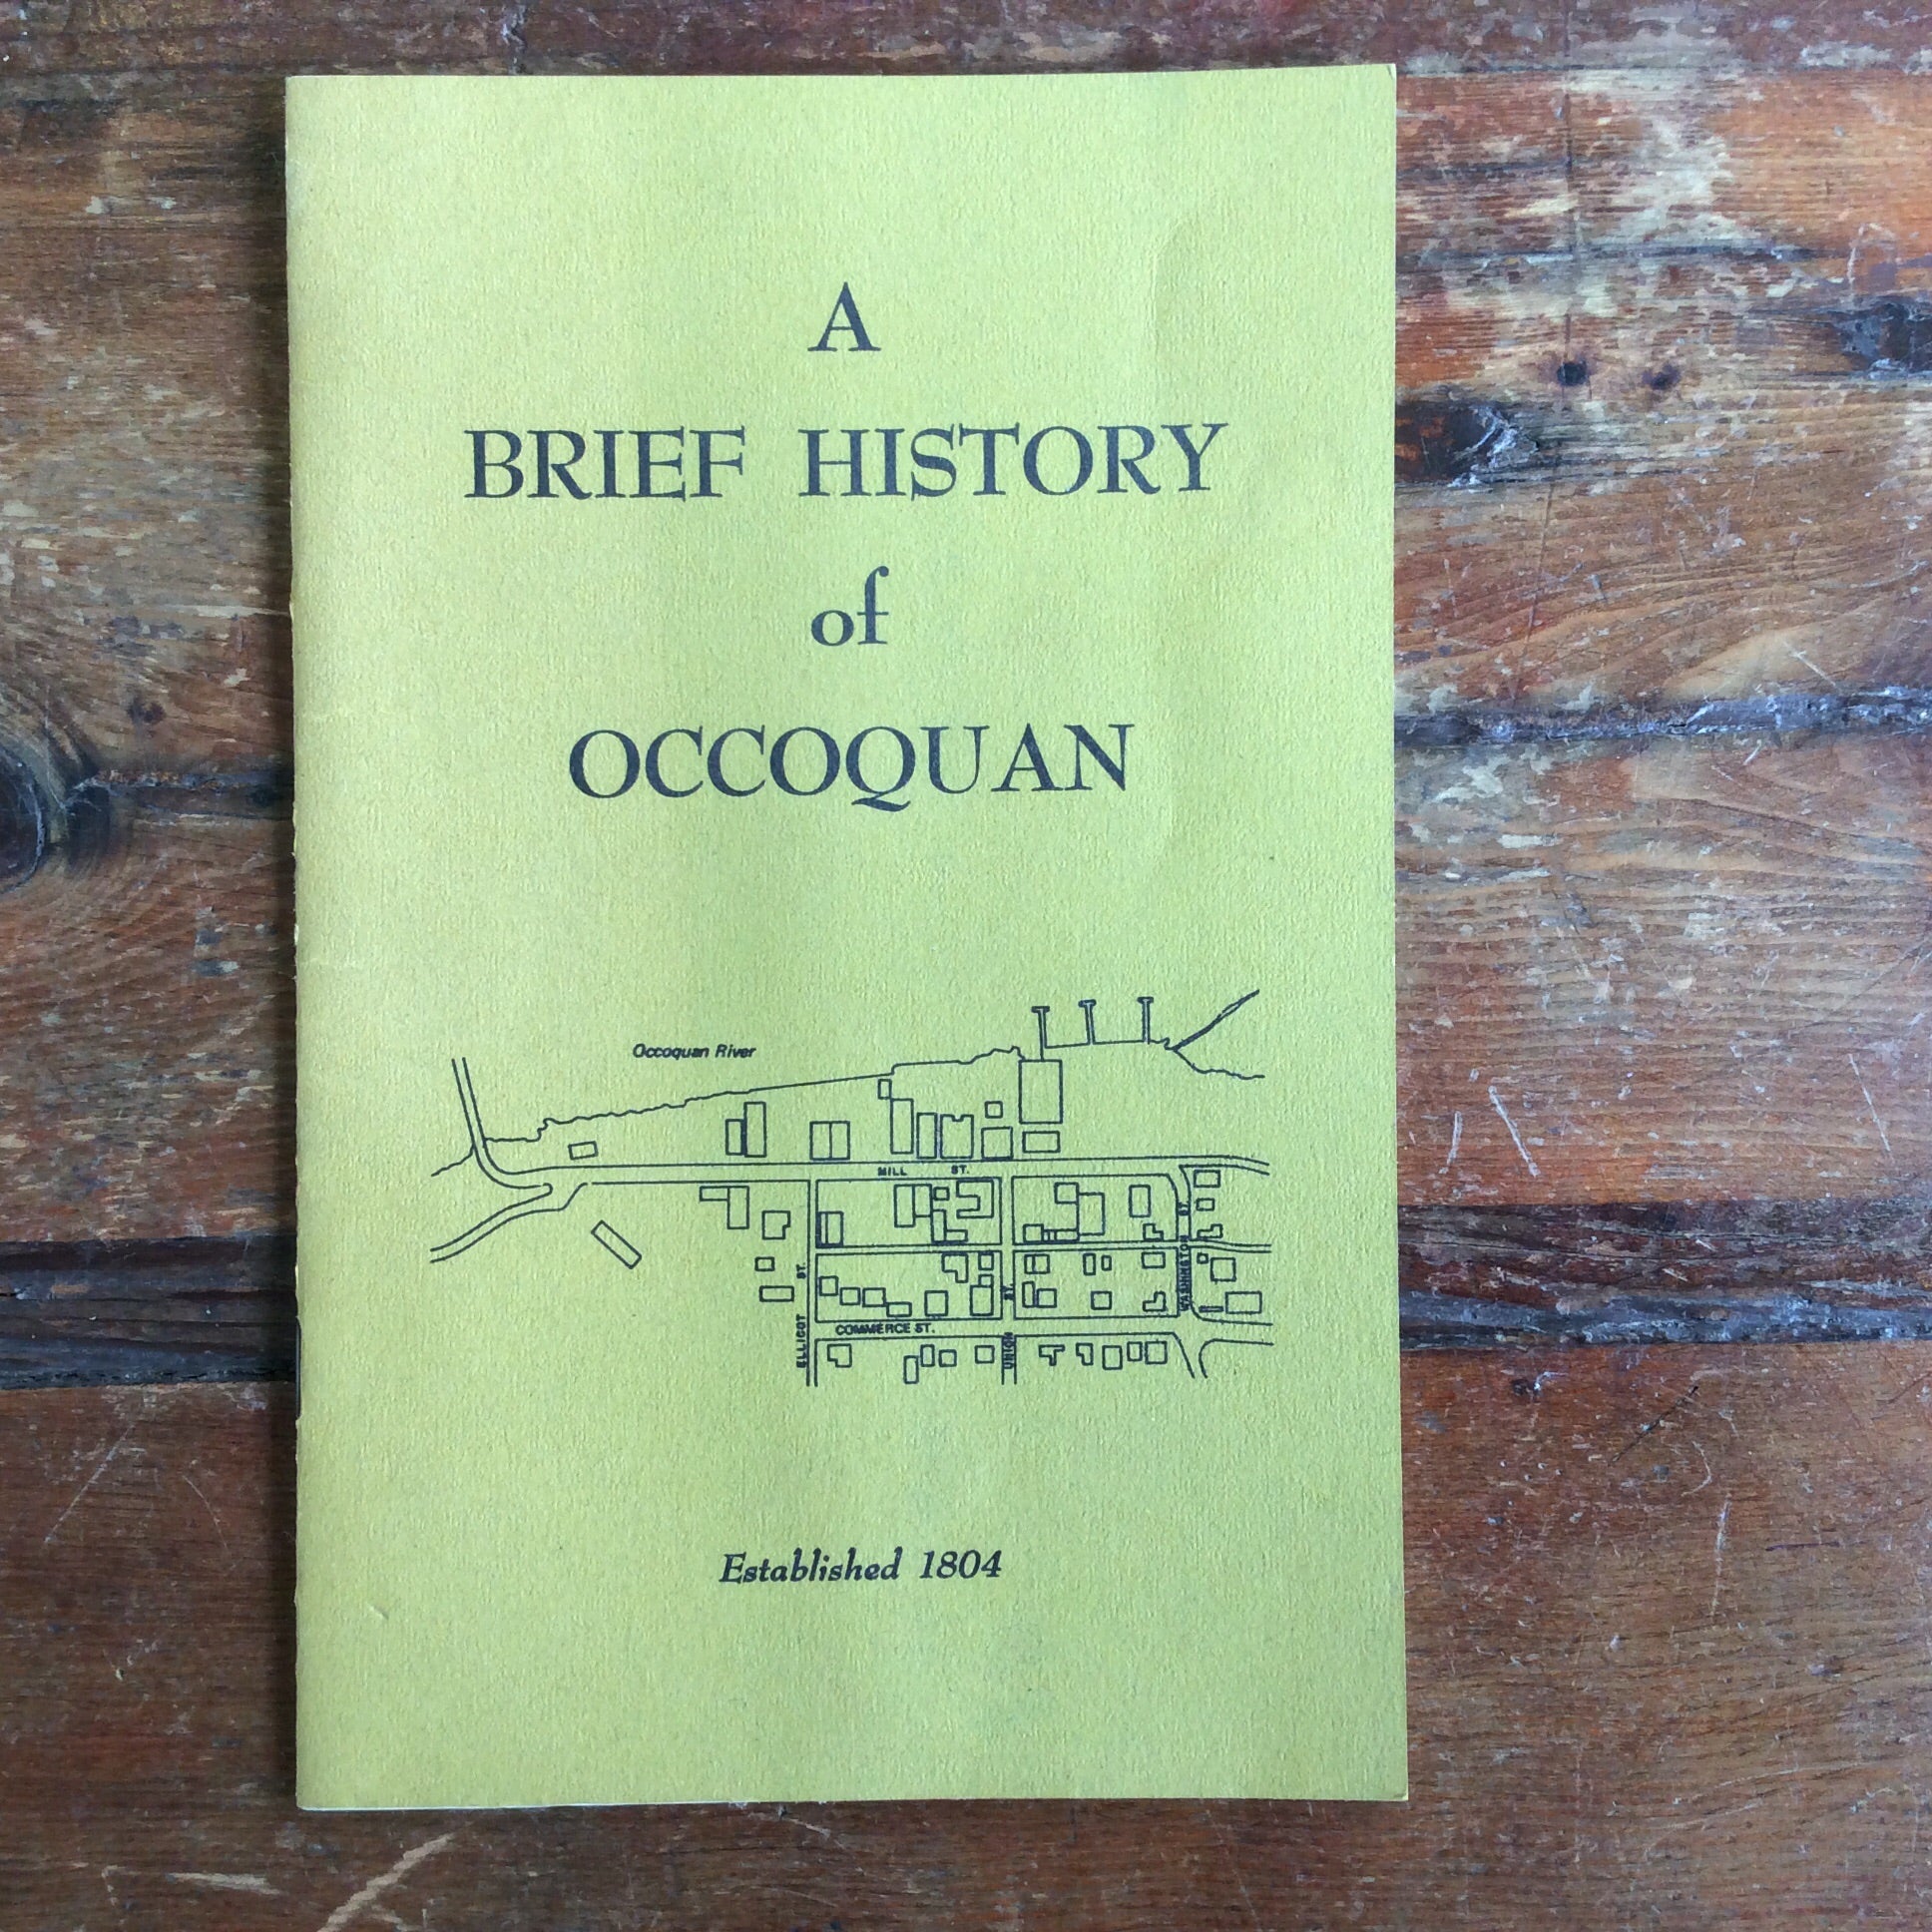 Book/Pamphlet: "A Brief History of Occoquan" - Annapolis Maritime Antiques